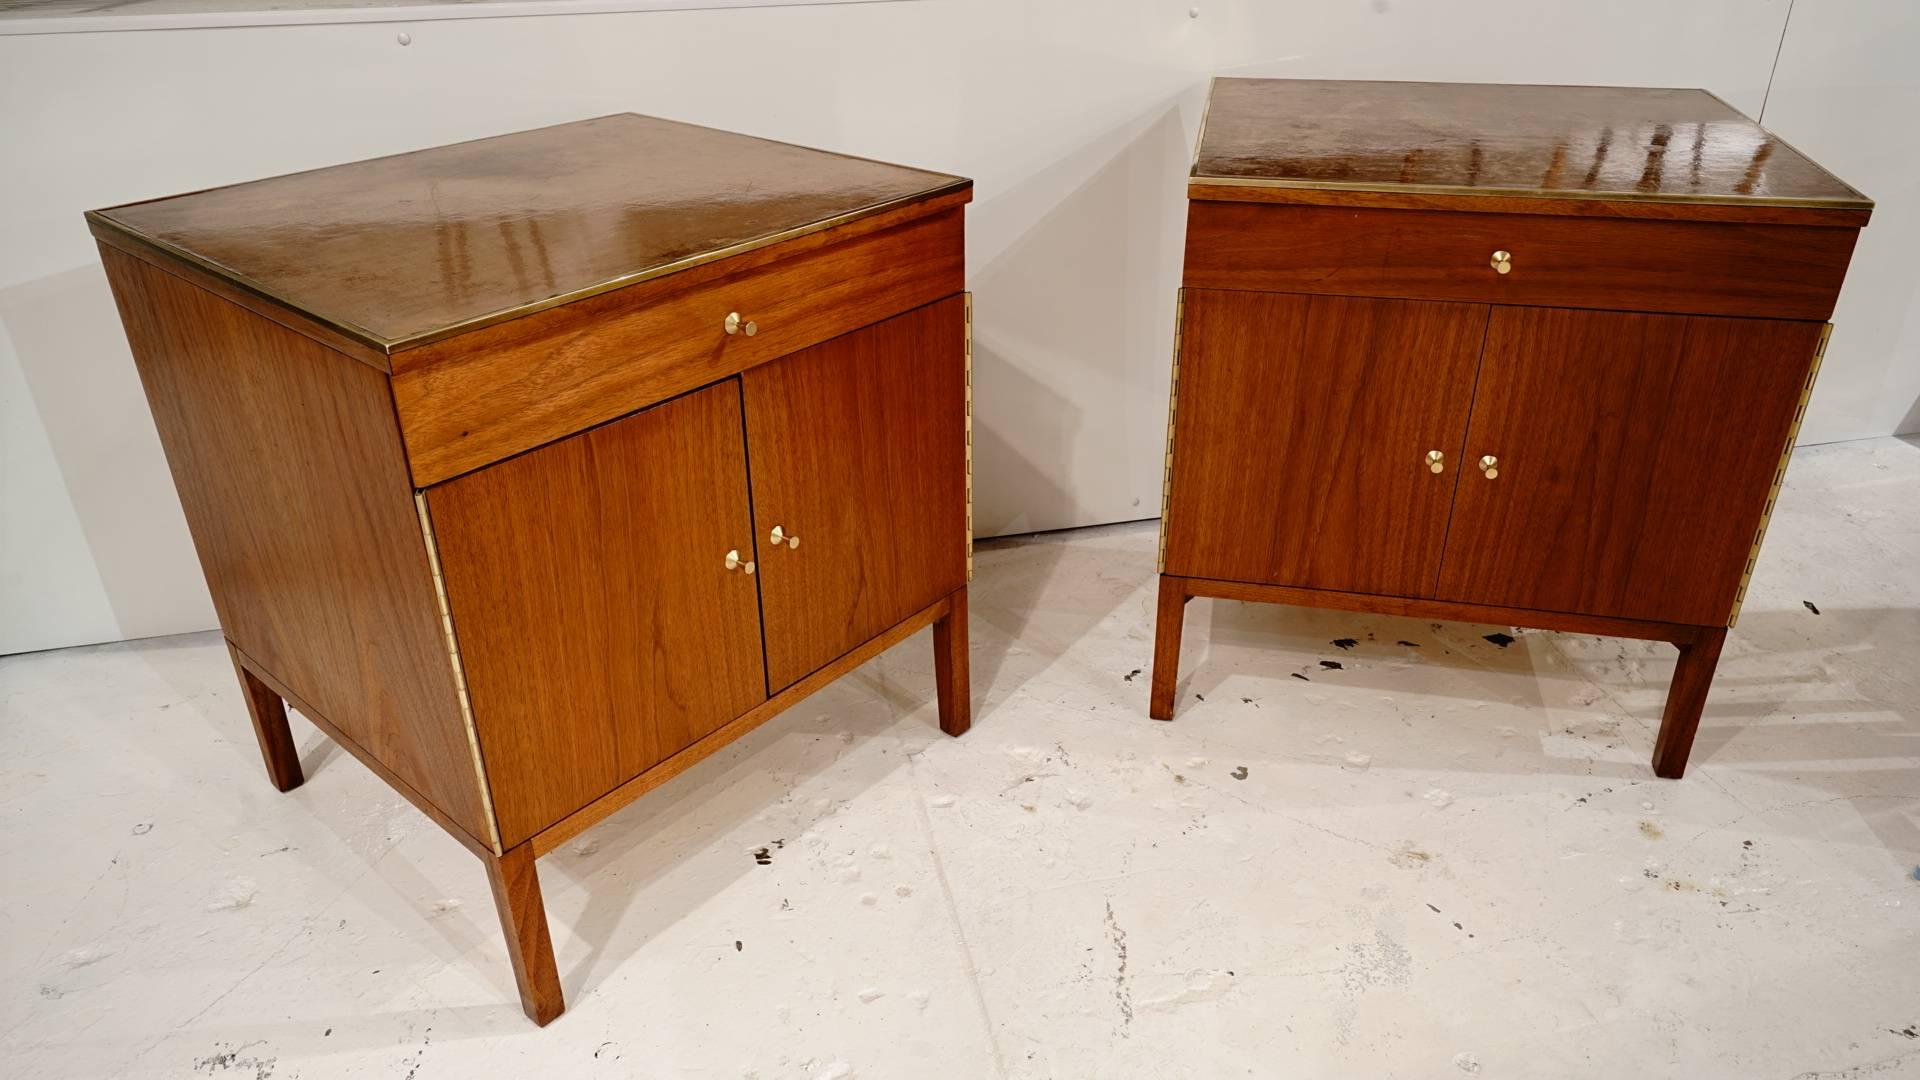 Matching pair of walnut Paul McCobb nightstands with a leather top and brass trim.